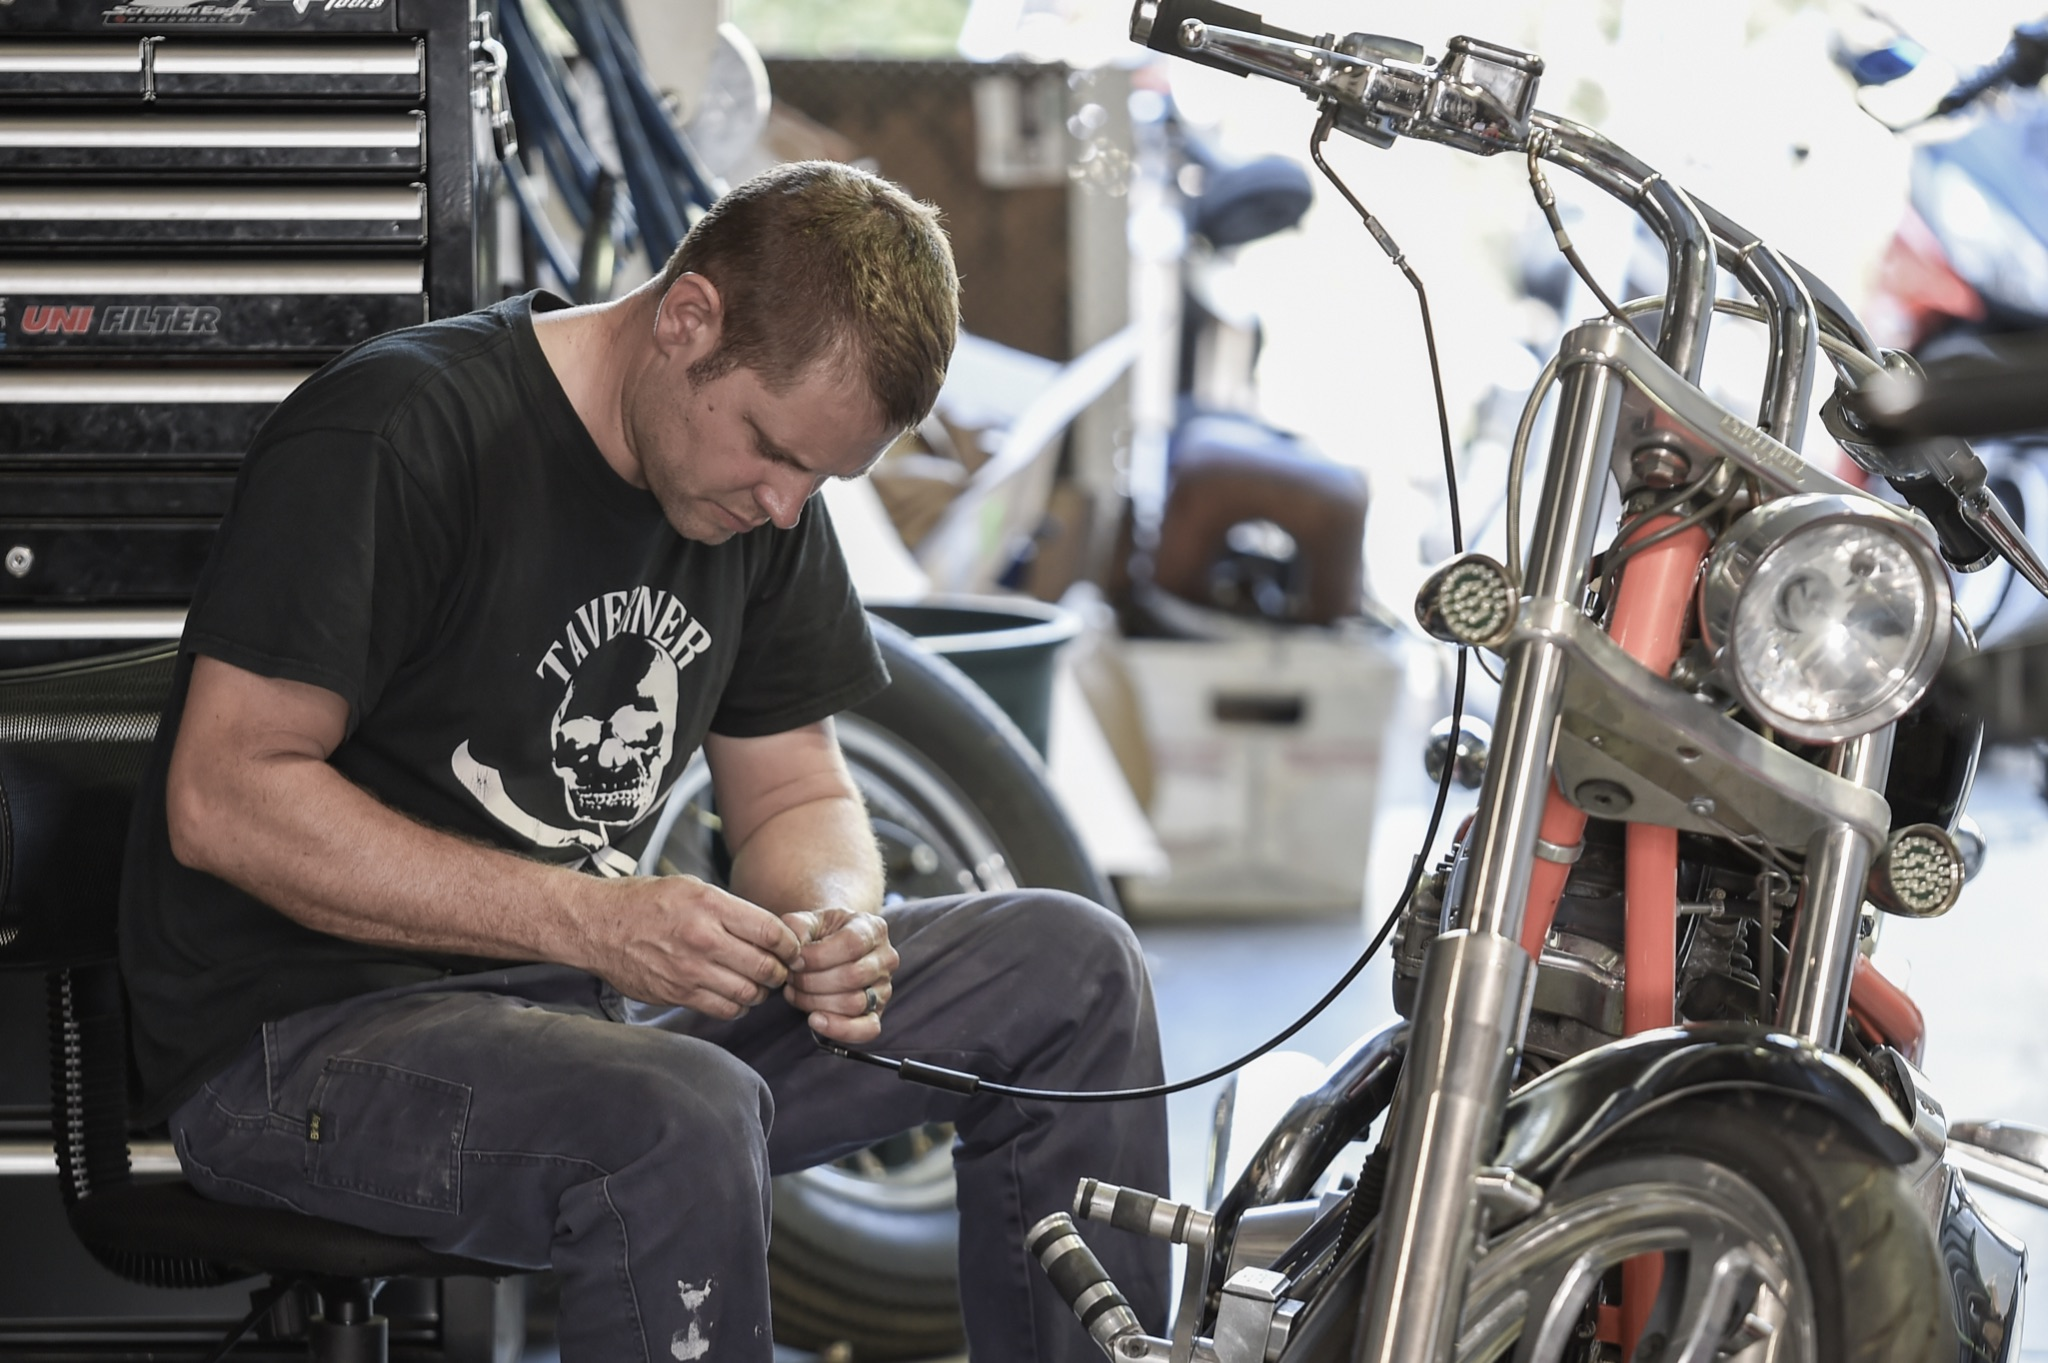 motorcycle services